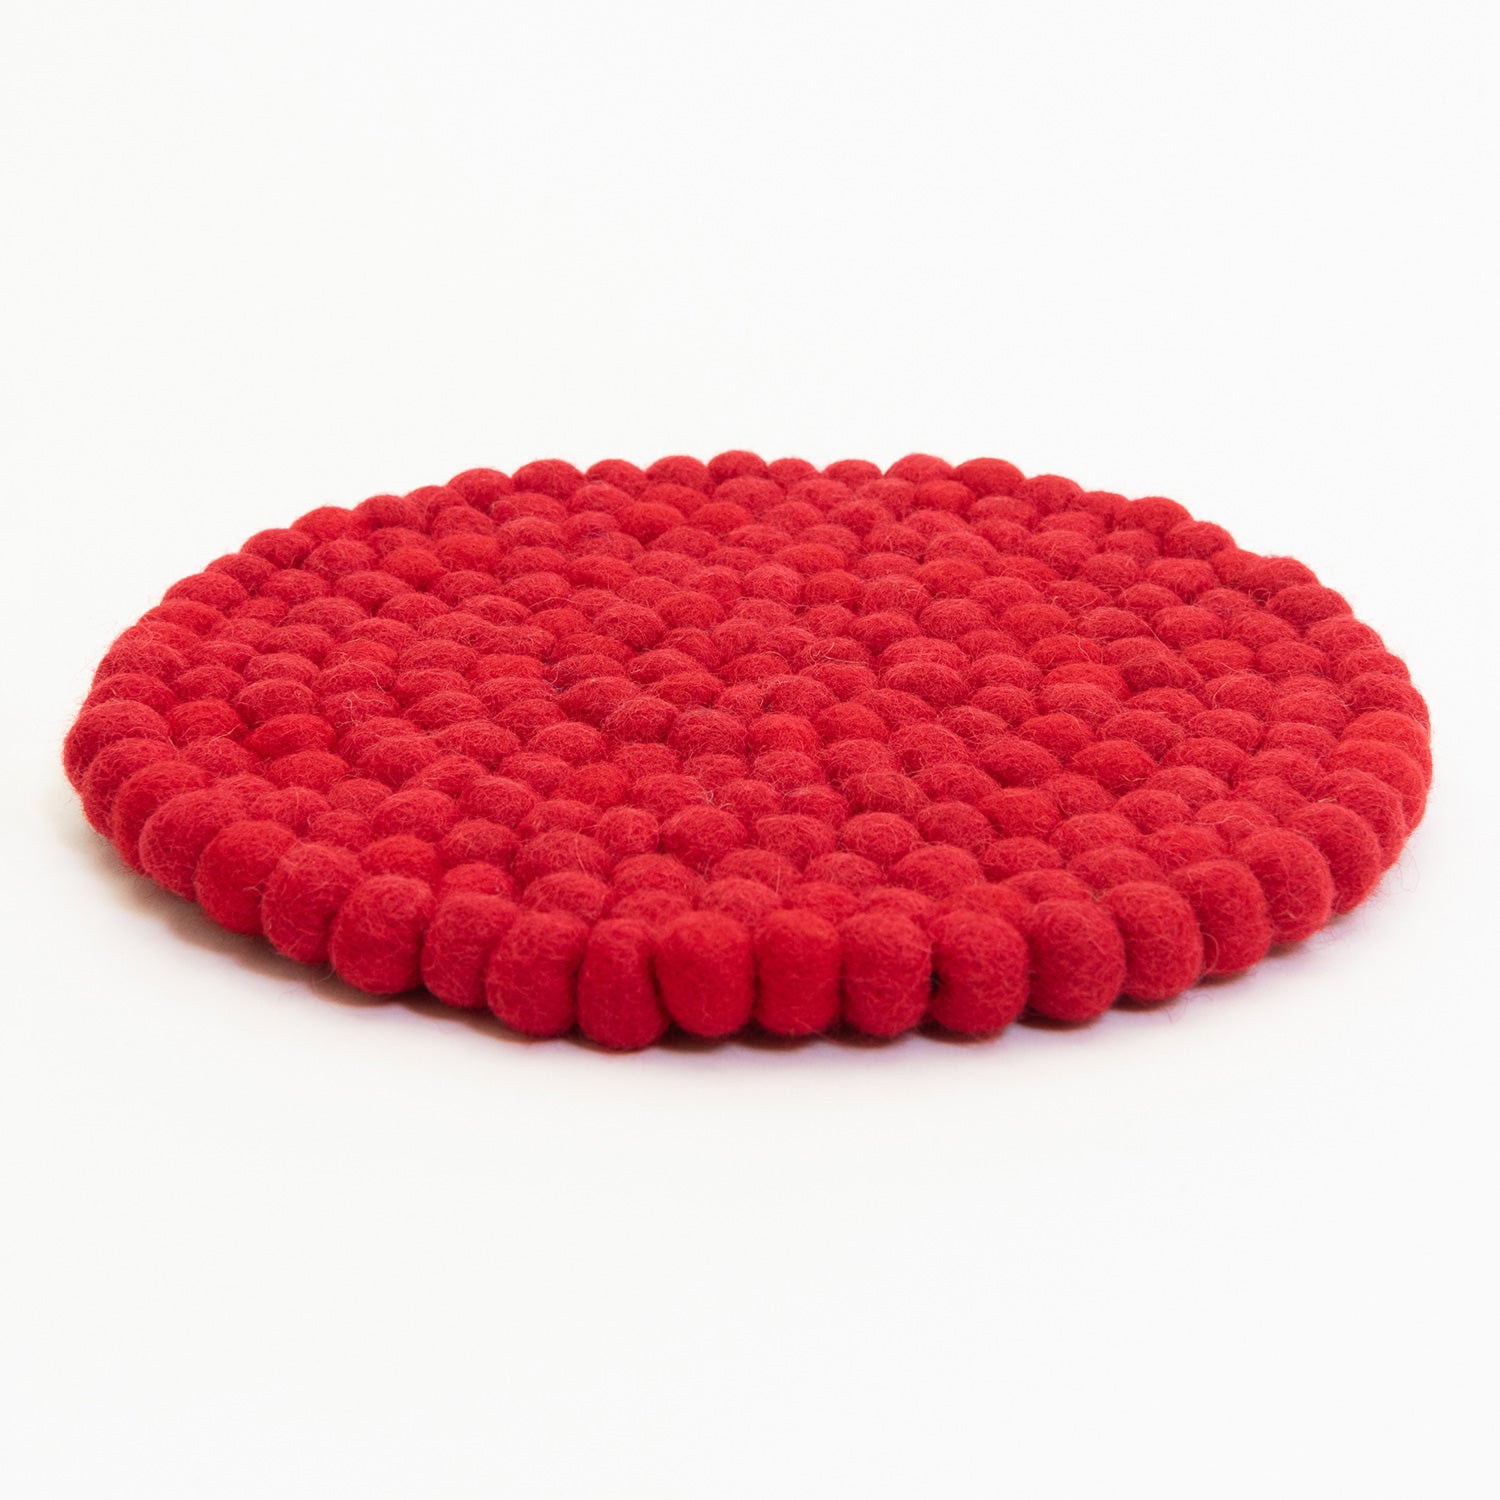 A red felt ball trivet pictured on a white background.